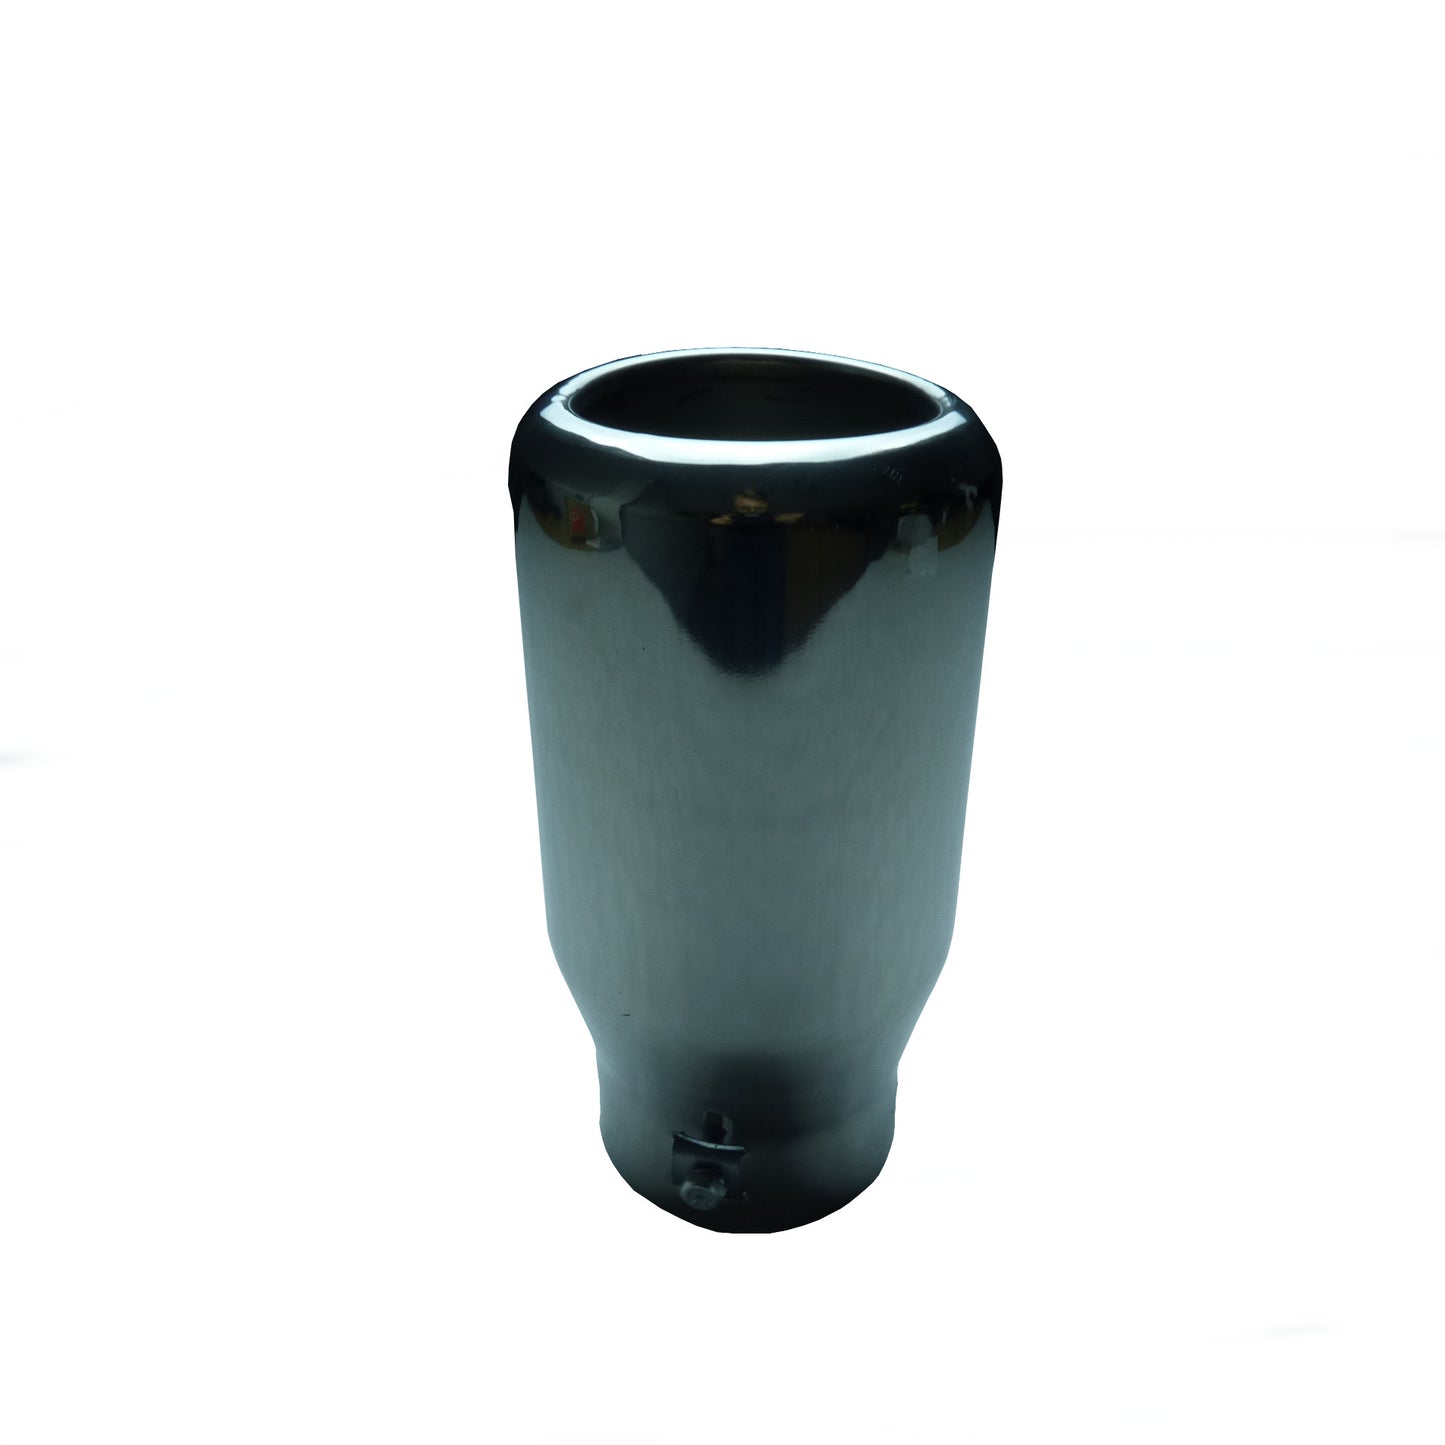 4 Inch Diameter Chunky Stainless Steel Short Exhaust Tip -  - sold by Direct4x4